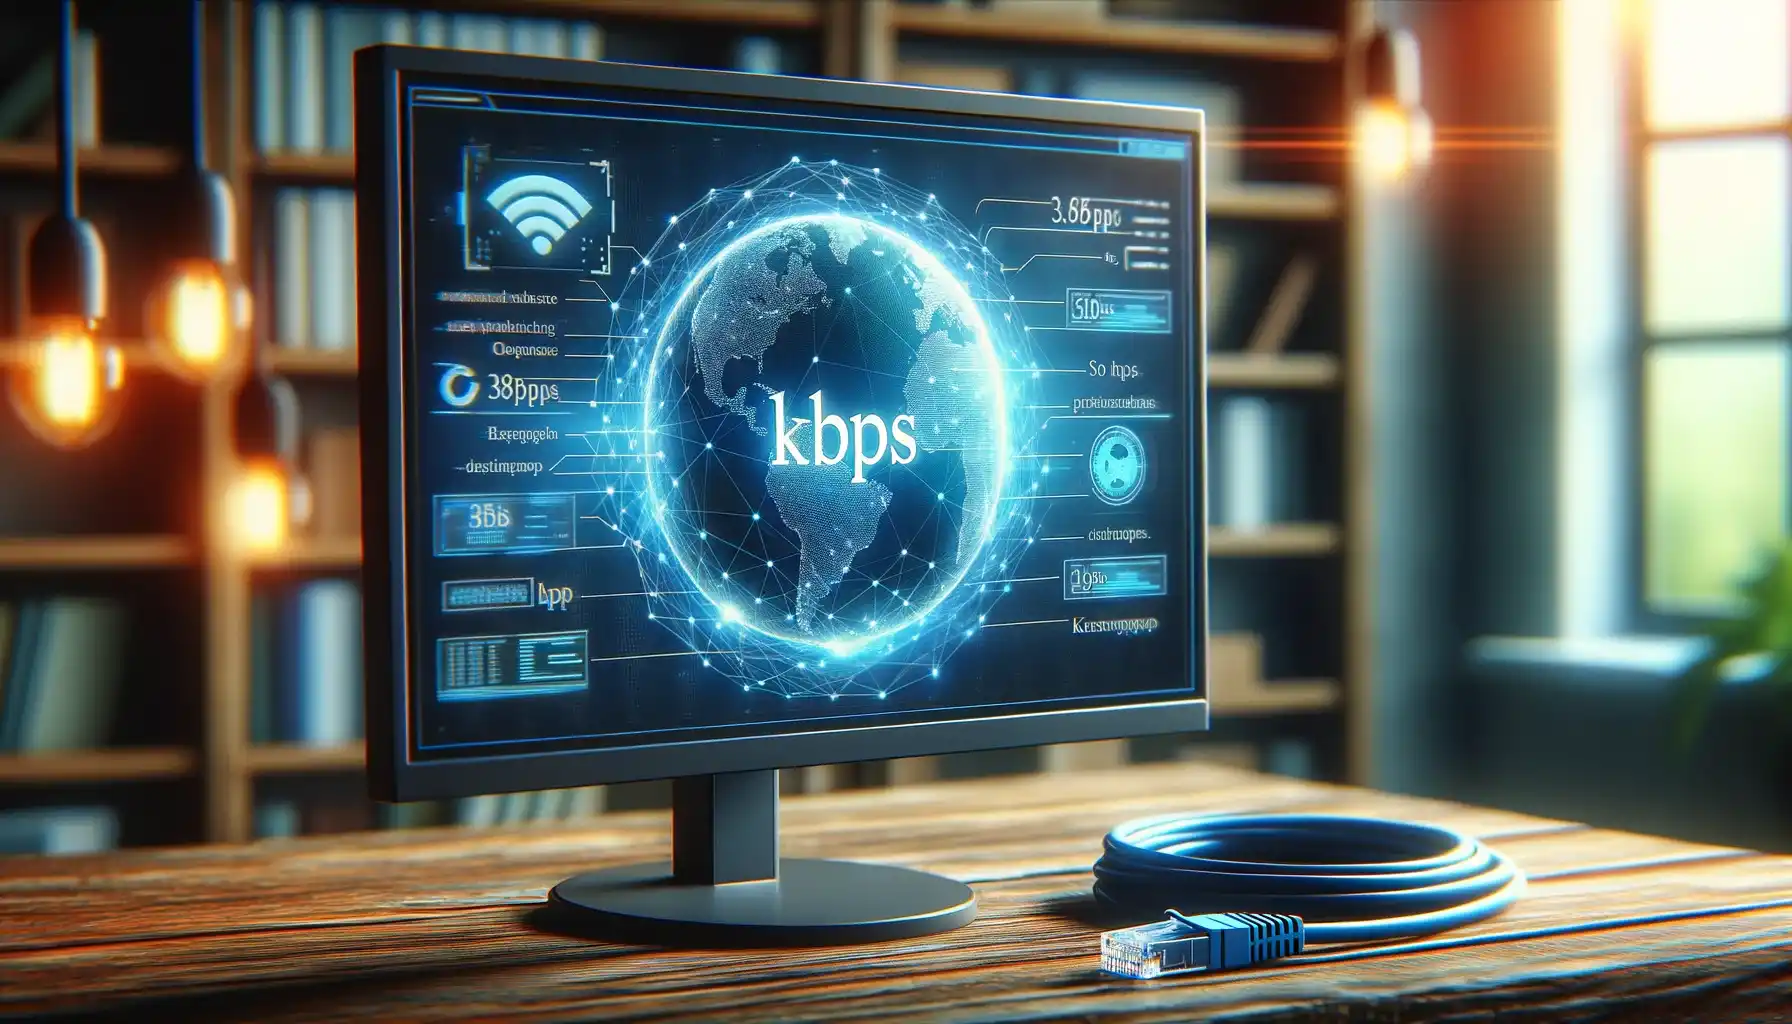 What is Kbps?